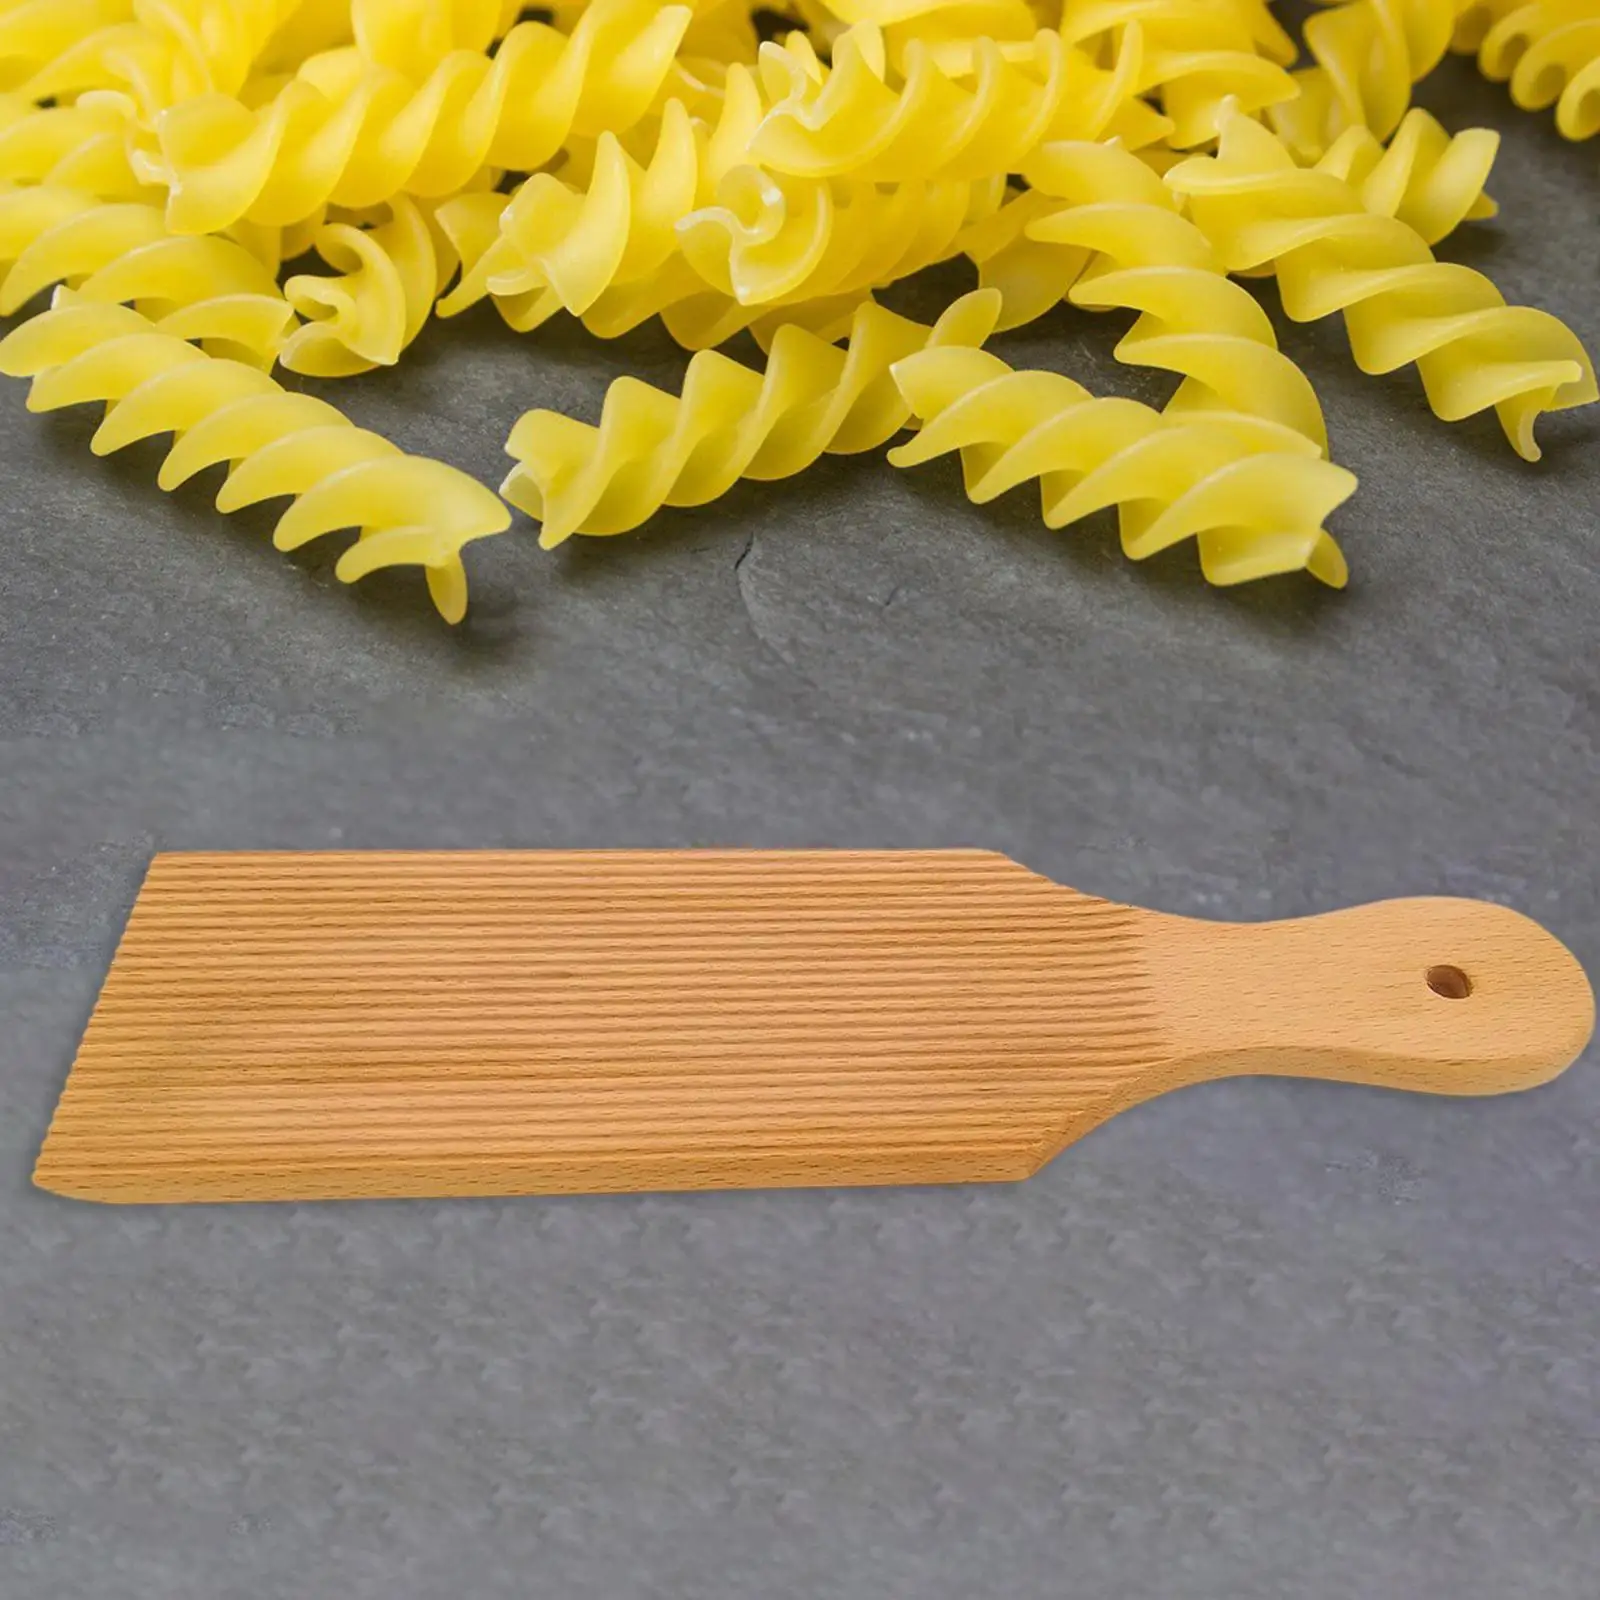 Gnocchi Pasta Plate Pasta Shaper Tools Butter Maker Butter Table for Homemade Pasta Home